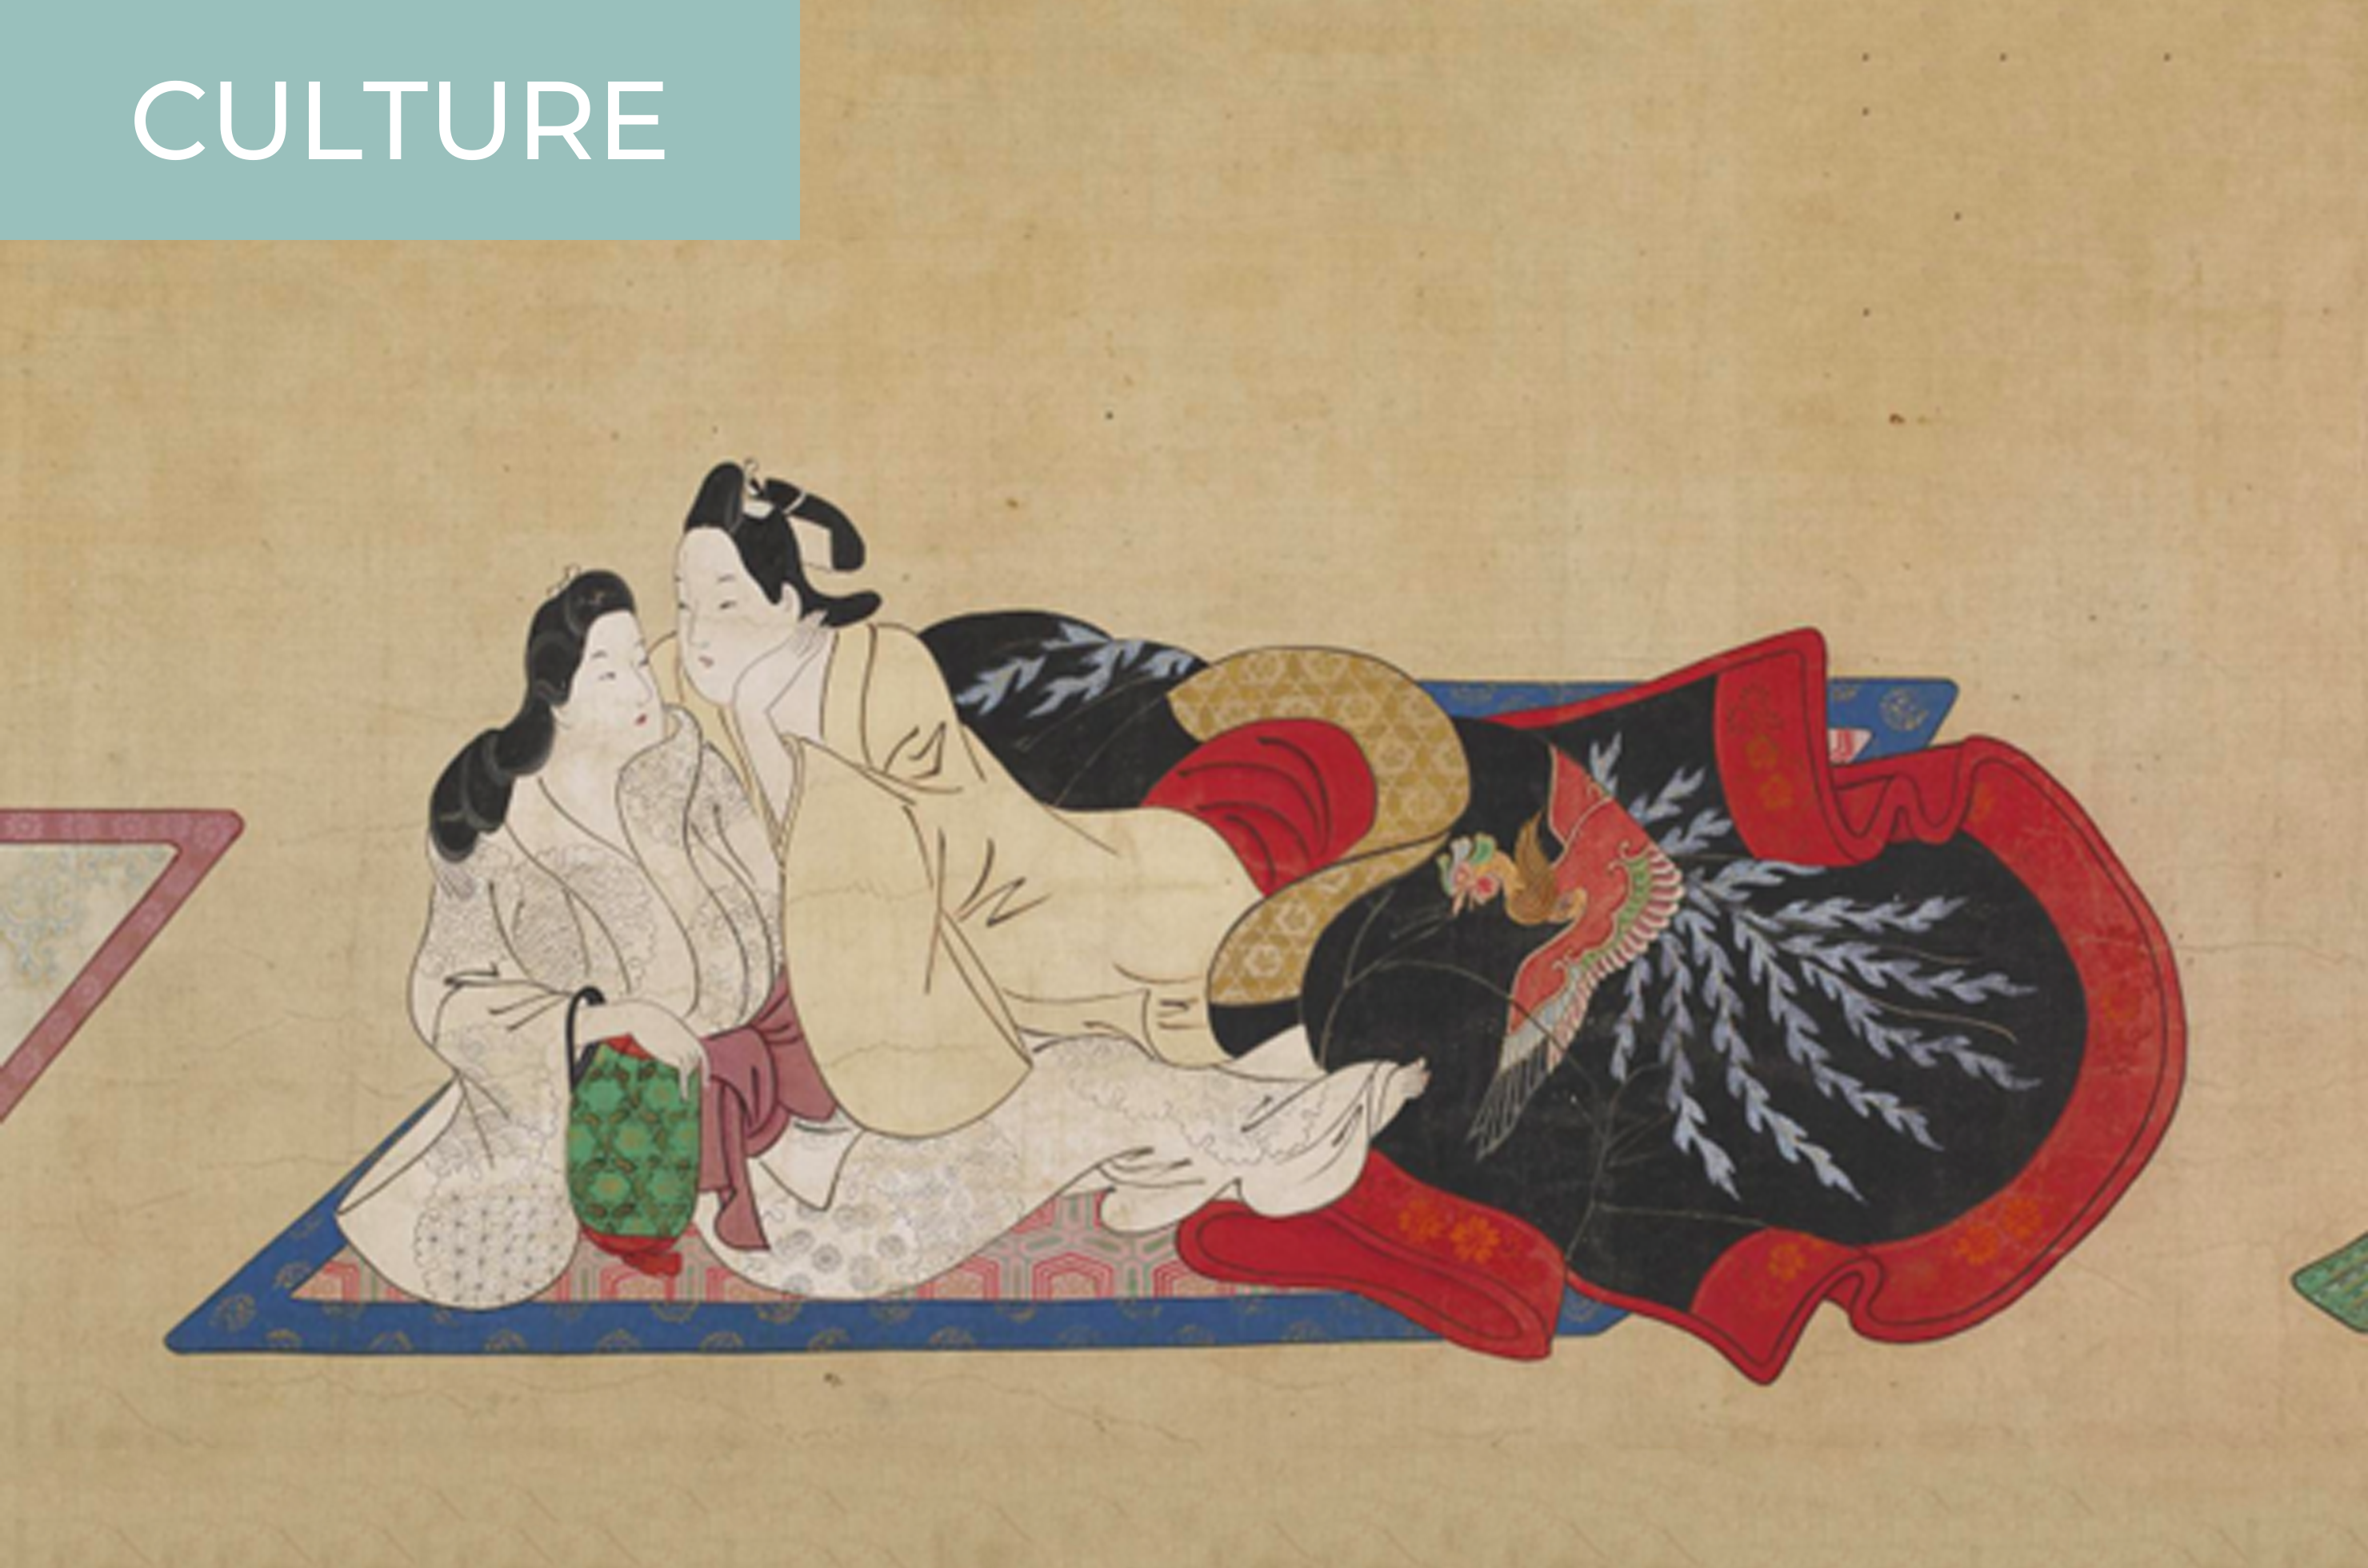 Shunga Ancient Japanese Pornography, or Something Else? picture